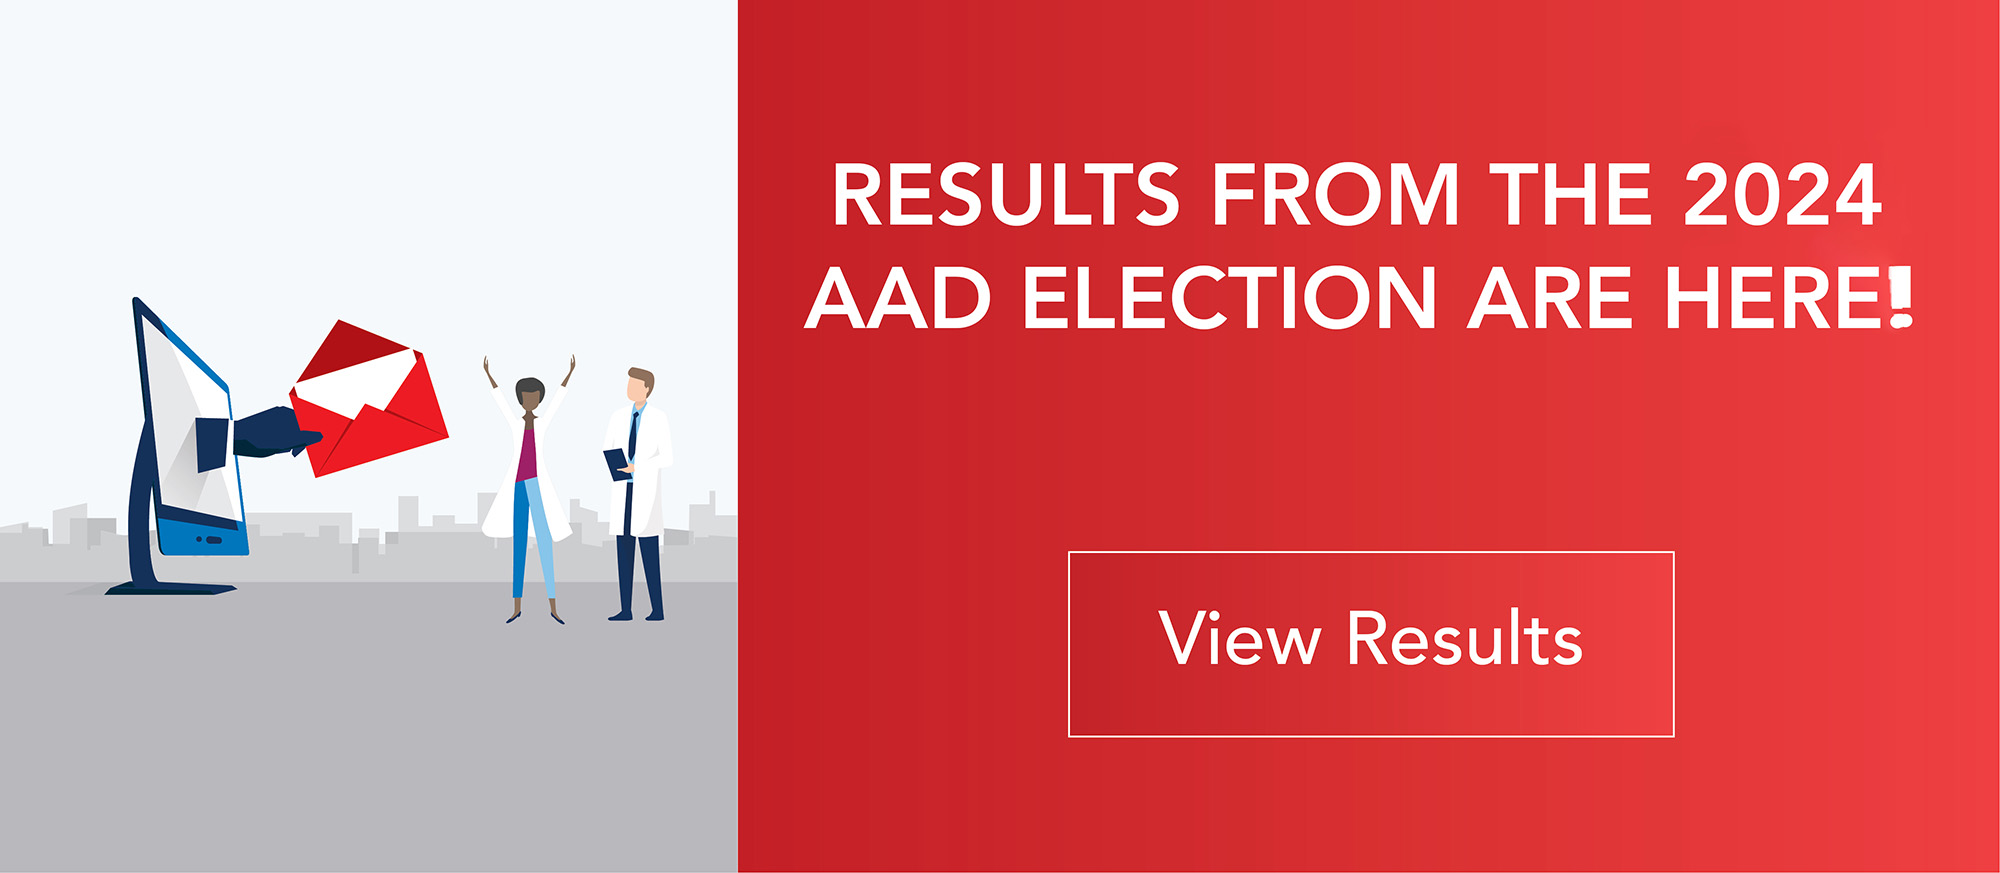 Results for 2024 AAD Election